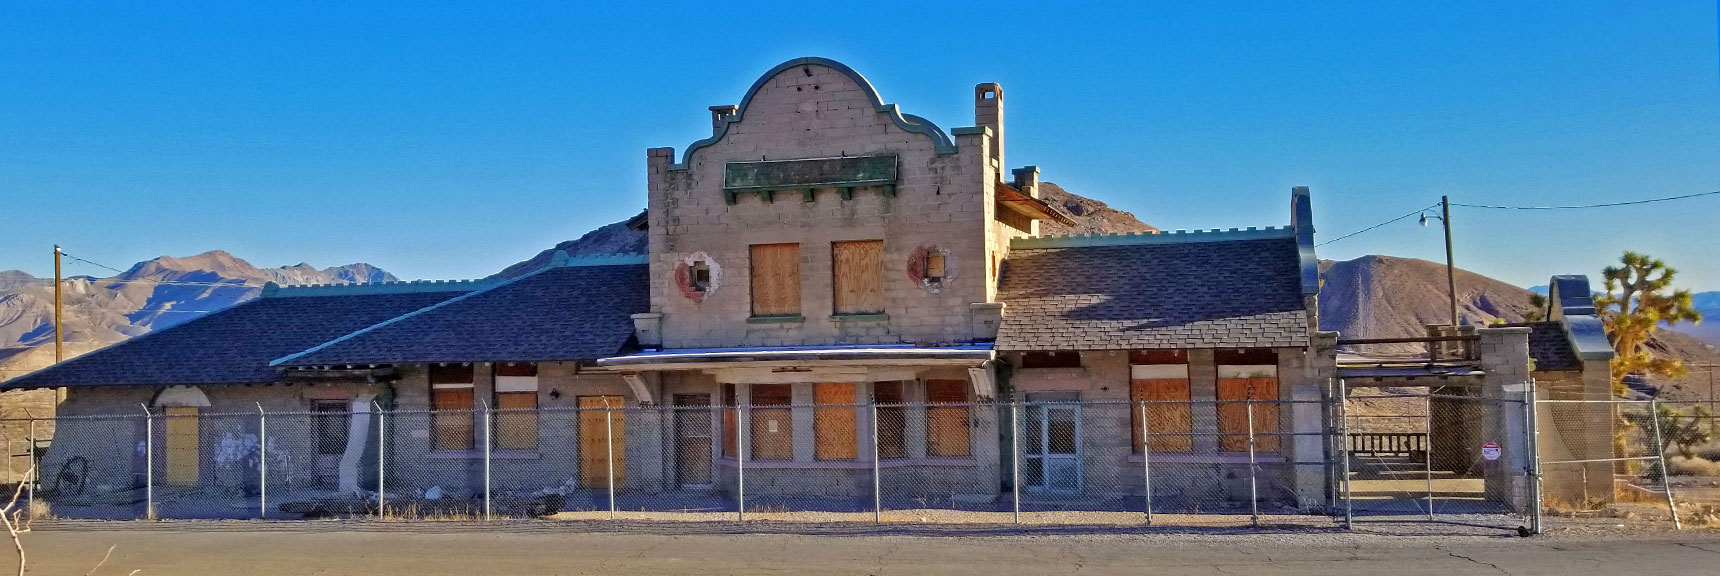 Train Depot - Most Intact Remaining Building in Rhyolite | Rhyolite Ghost Town | Death Valley Area, Nevada